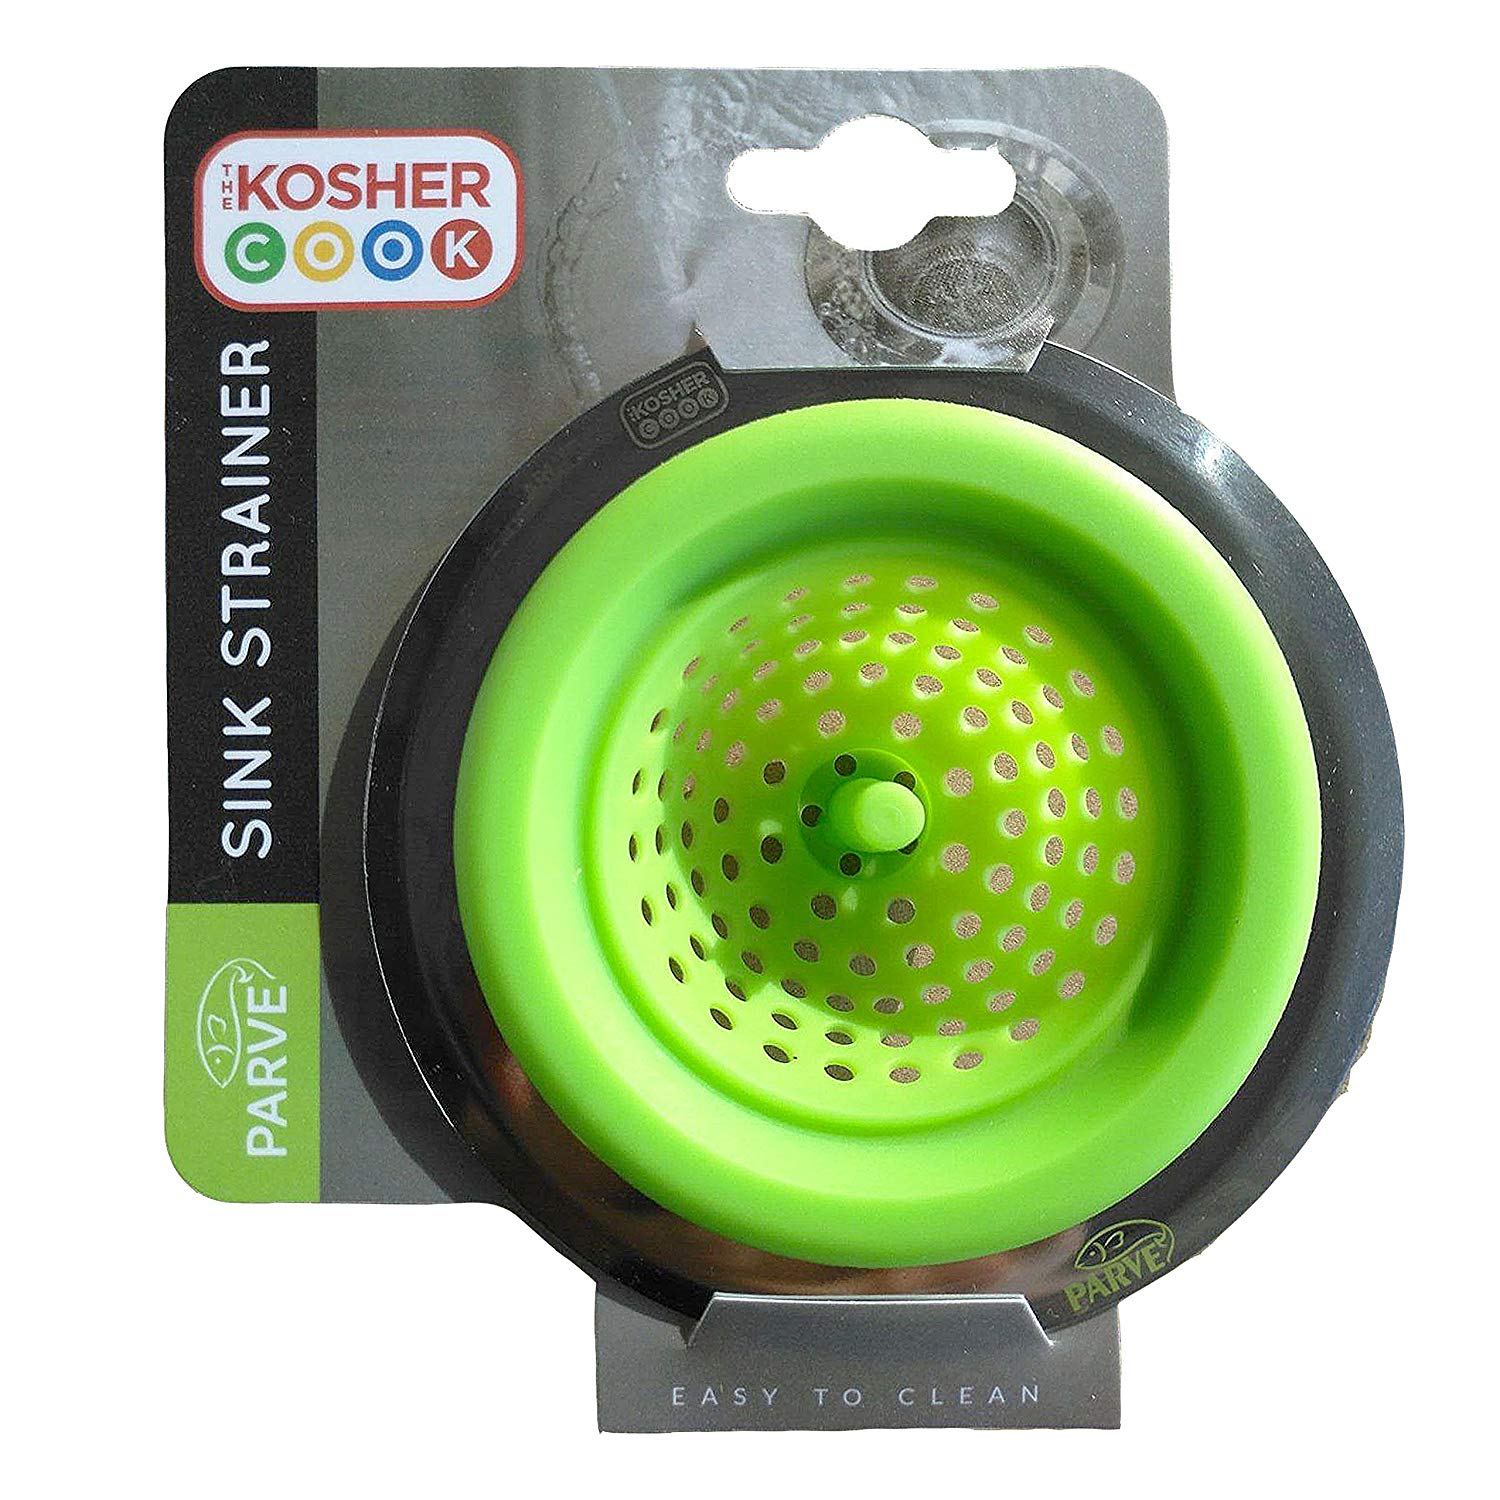 Parve Green Kitchen Sink Strainer - Durable Silicone – Large Wide Rim - Drains Water Fast and Efficiently - Color Coded Kitchen Tools by The Kosher Cook